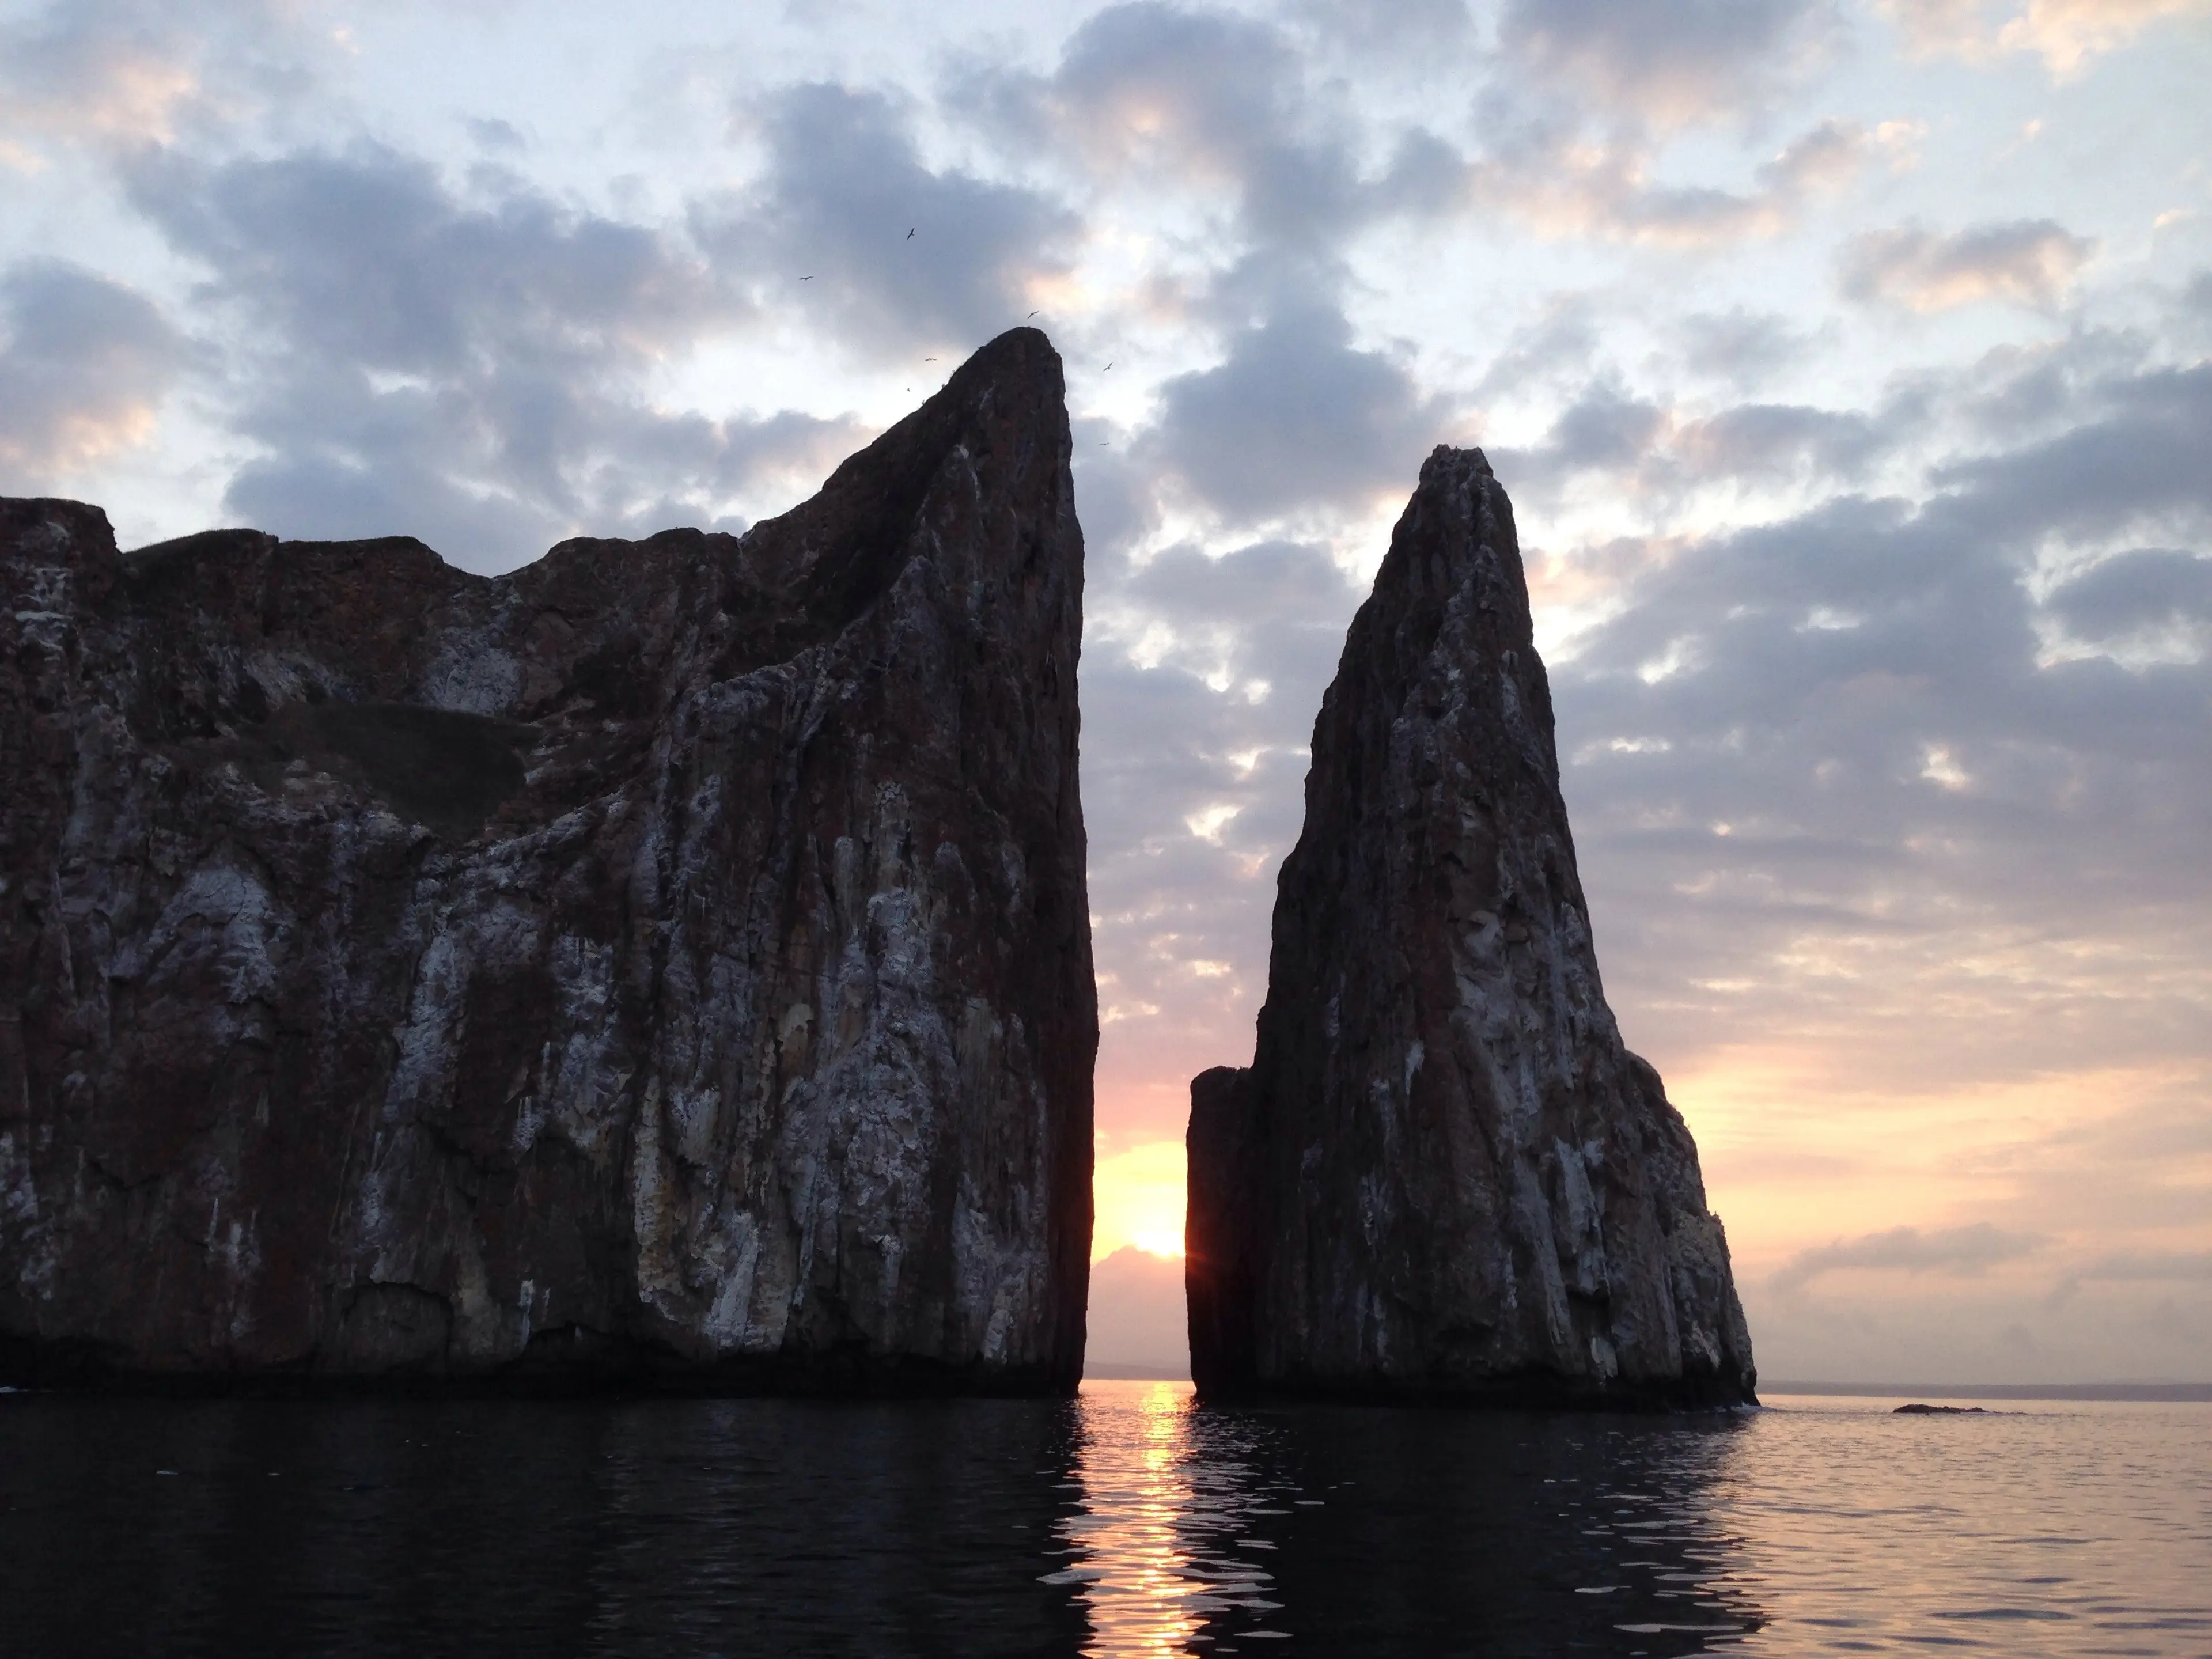 1-Day Relaxing Sightseeing Trip to Galapagos with Friends for Locals